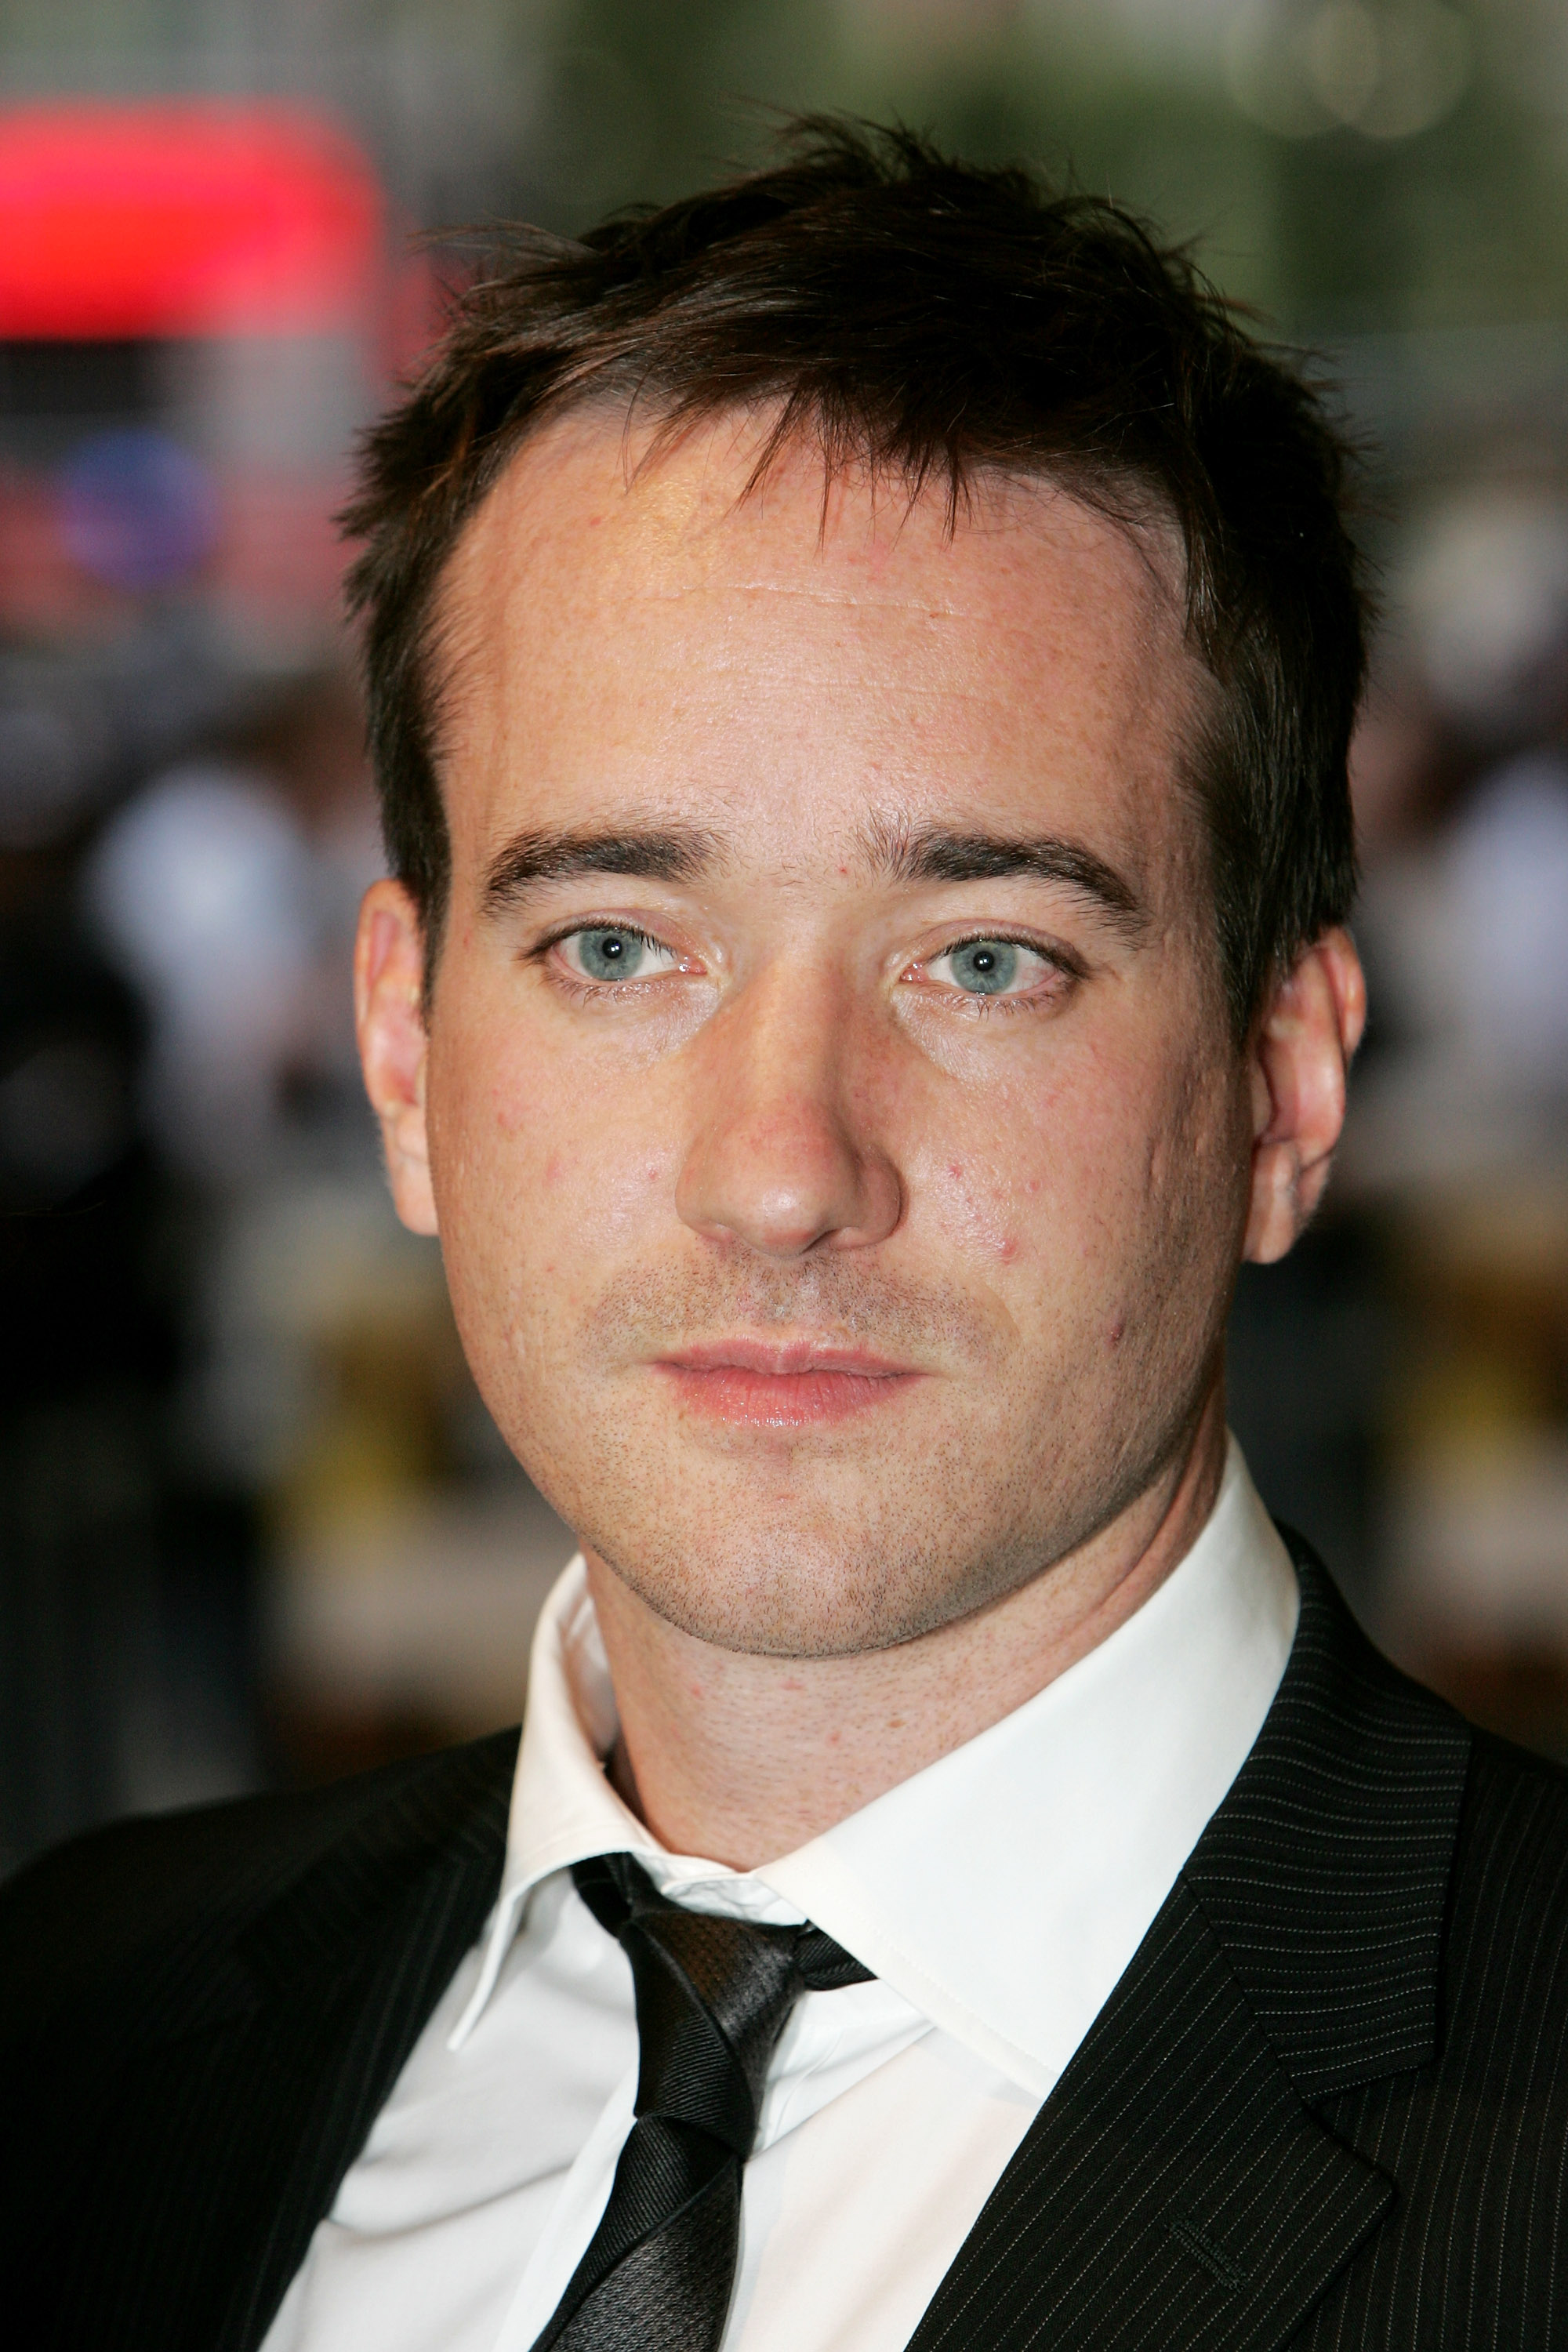 Matthew MacFadyen arrives at the UK Premiere of the film "Pride & Prejudice" at the Odeon Leicester Square on September 5, 2005, in London, England | Source: Getty Images